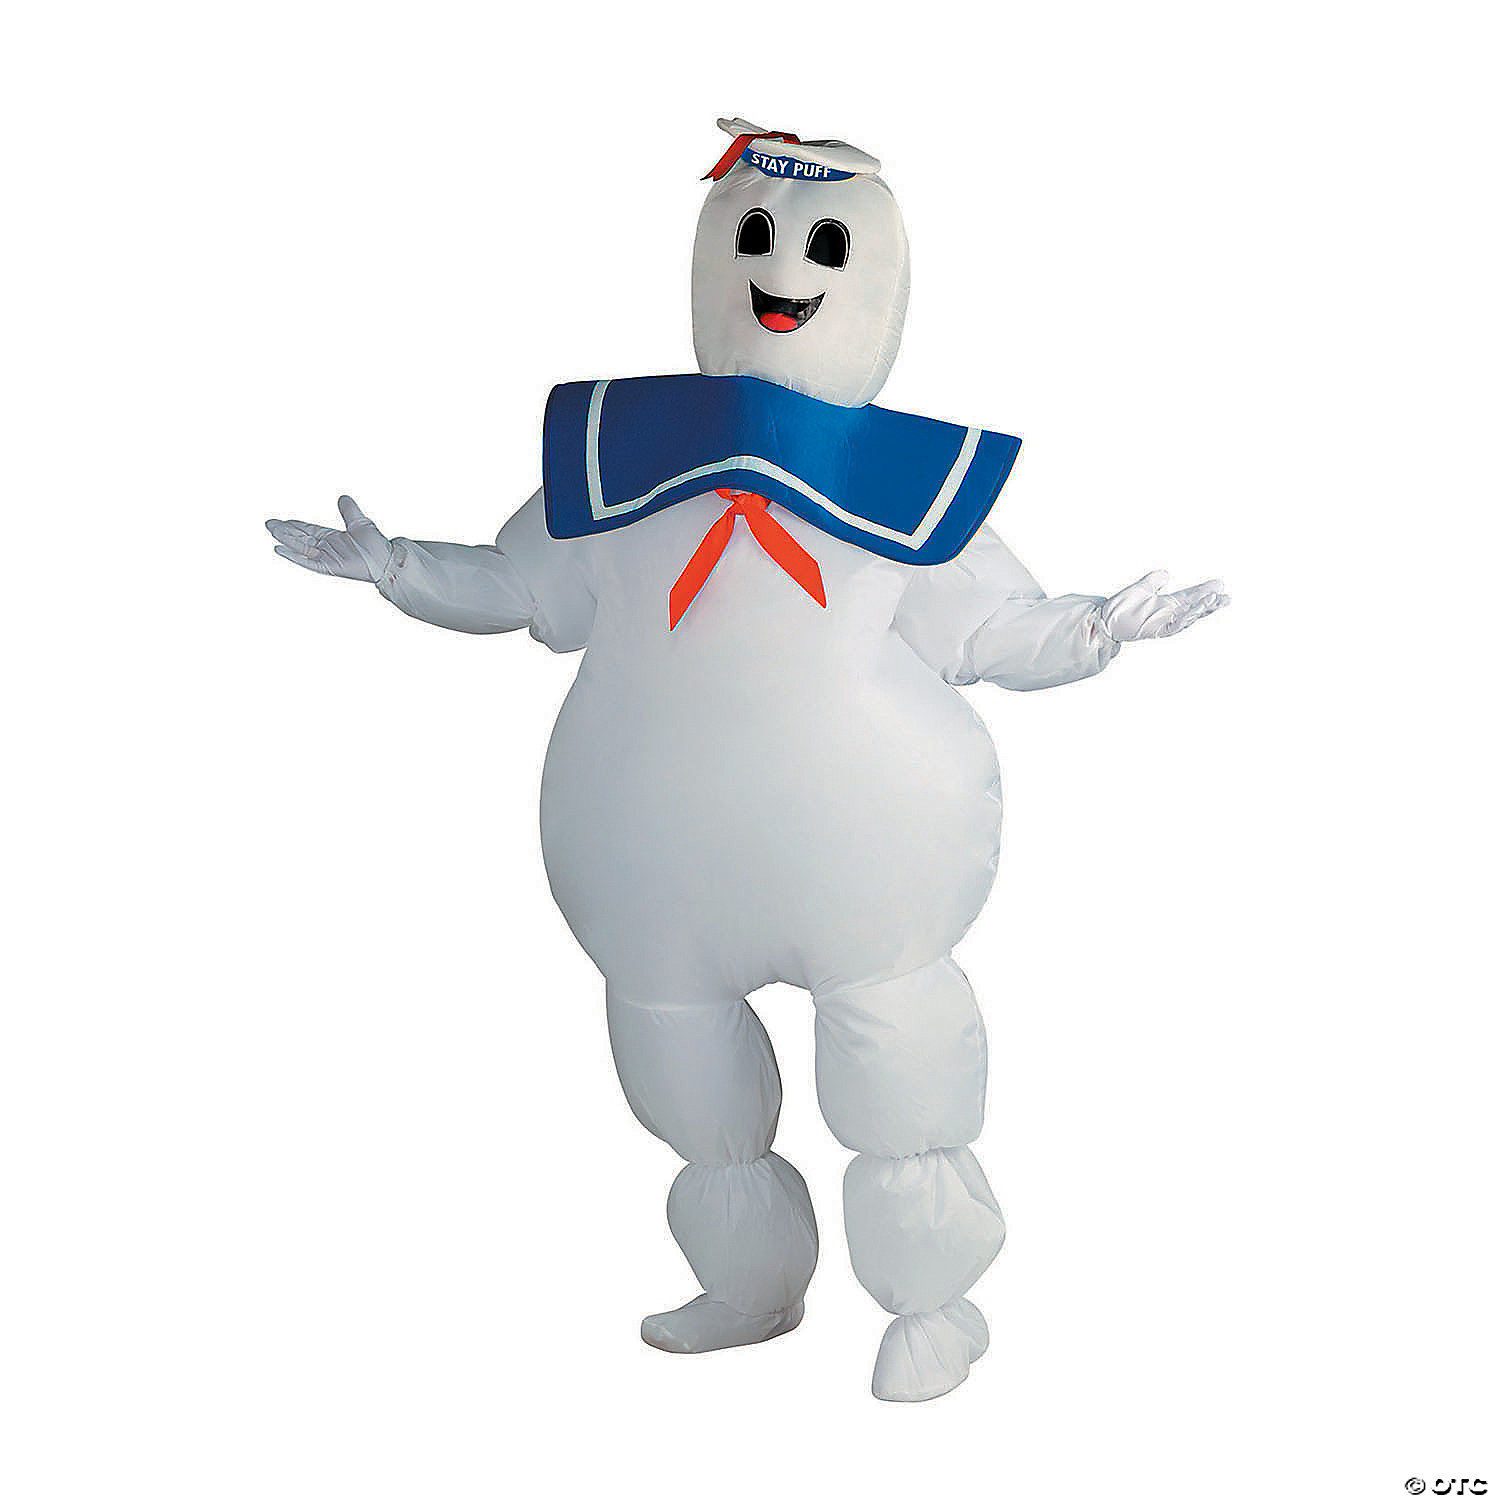 Ghostbusters Deluxe Stay Puft Kid's Costume